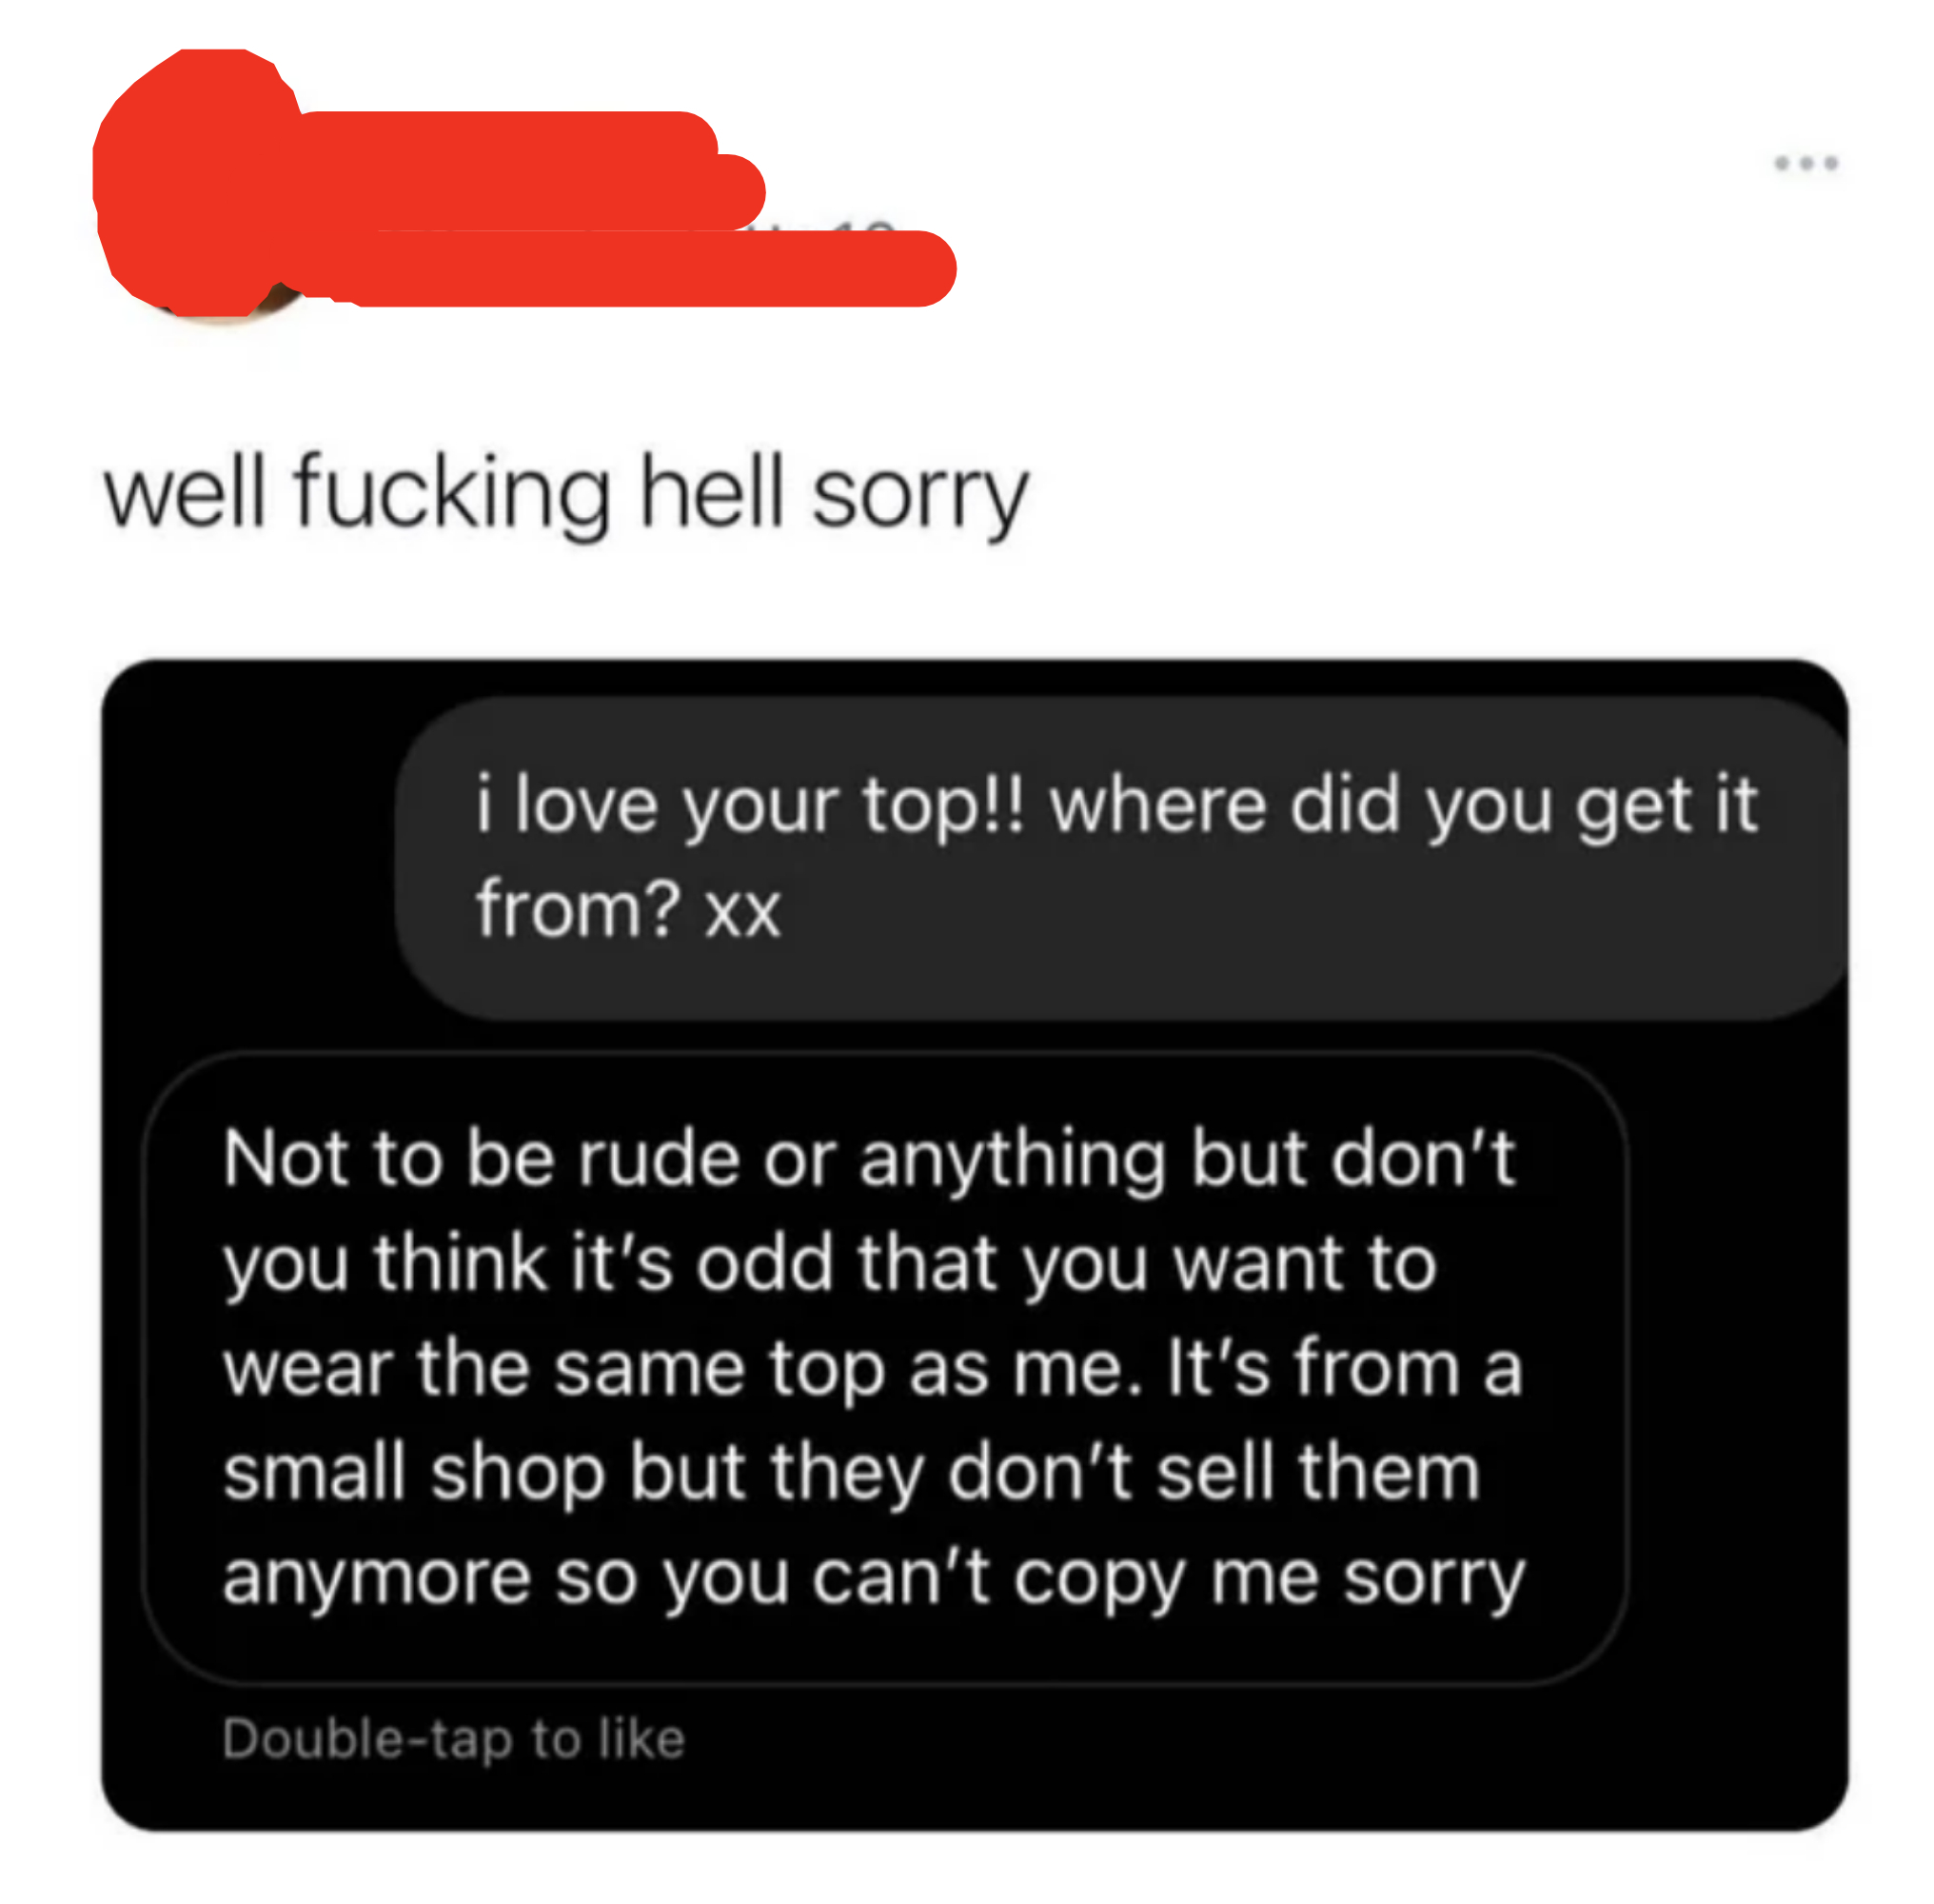 after the compliment they say, not to be rude but don&#x27;t you think it&#x27;s odd that you want to wear the same top as me it&#x27;s from a small shop but they don&#x27;t sell them anymore so you can&#x27;t copy me sorry